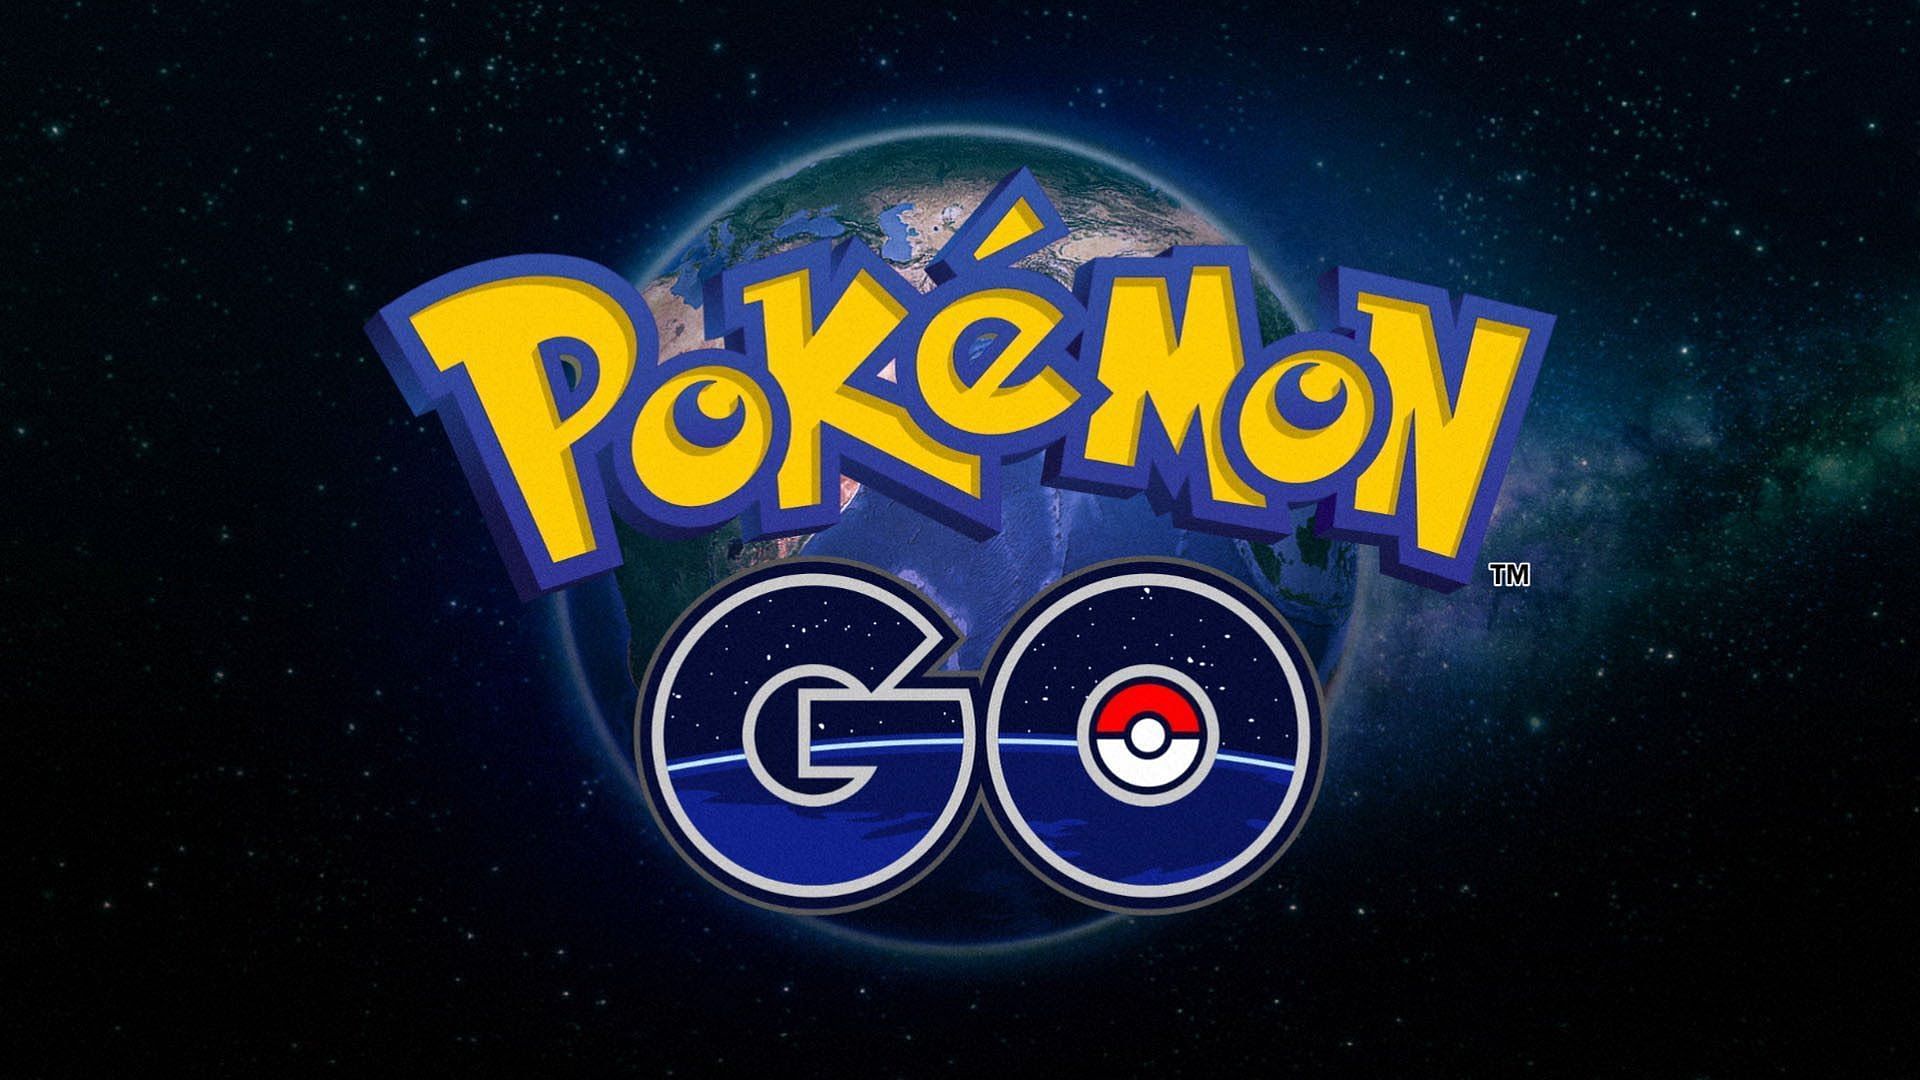 Official imagery for Pokemon GO (Image via Niantic)